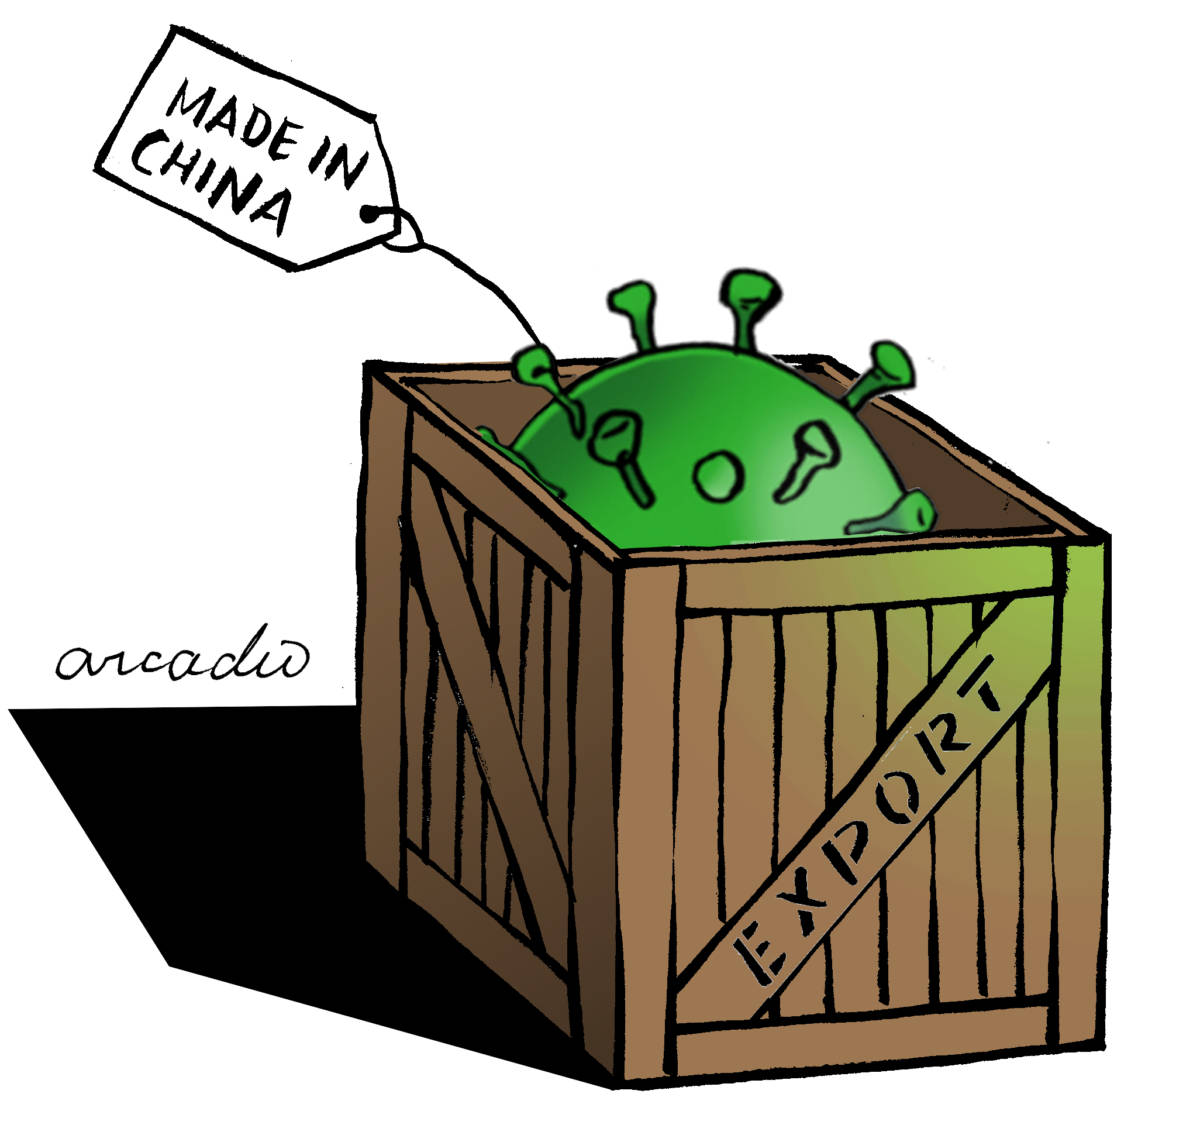 Made in China by Arcadio Esquivel, Costa Rica